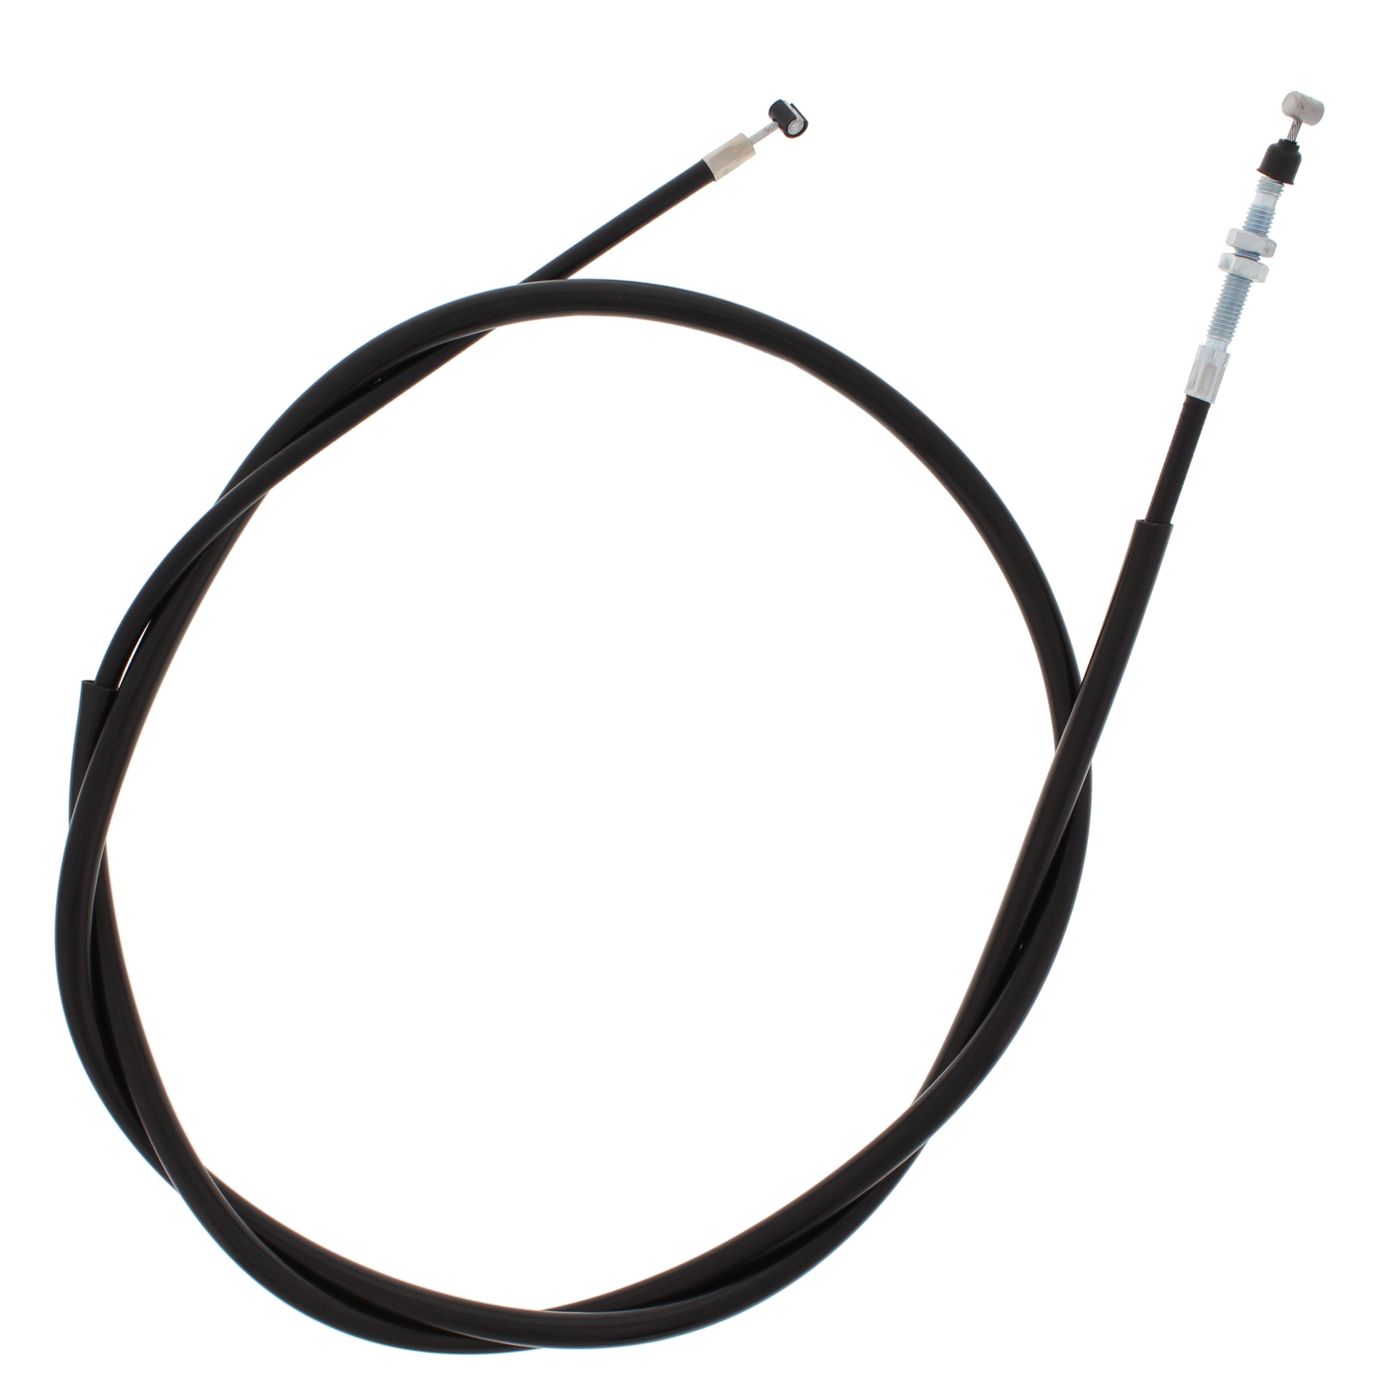 Wrp Brake Cables - WRP454039 image